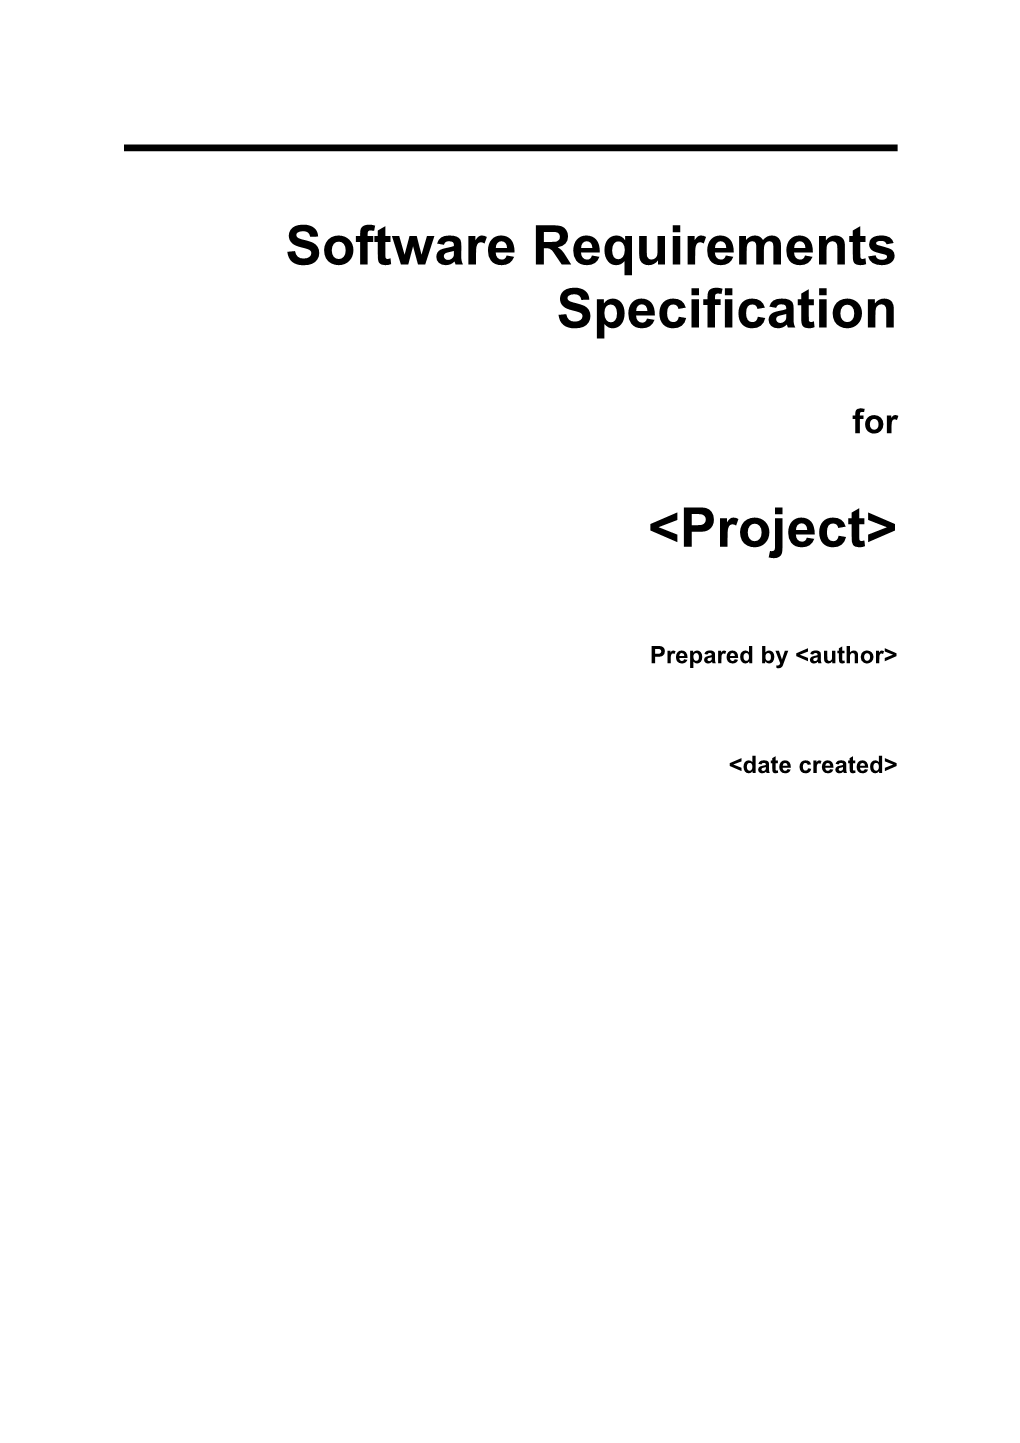 IEEE Software Requirements Specification Template s2